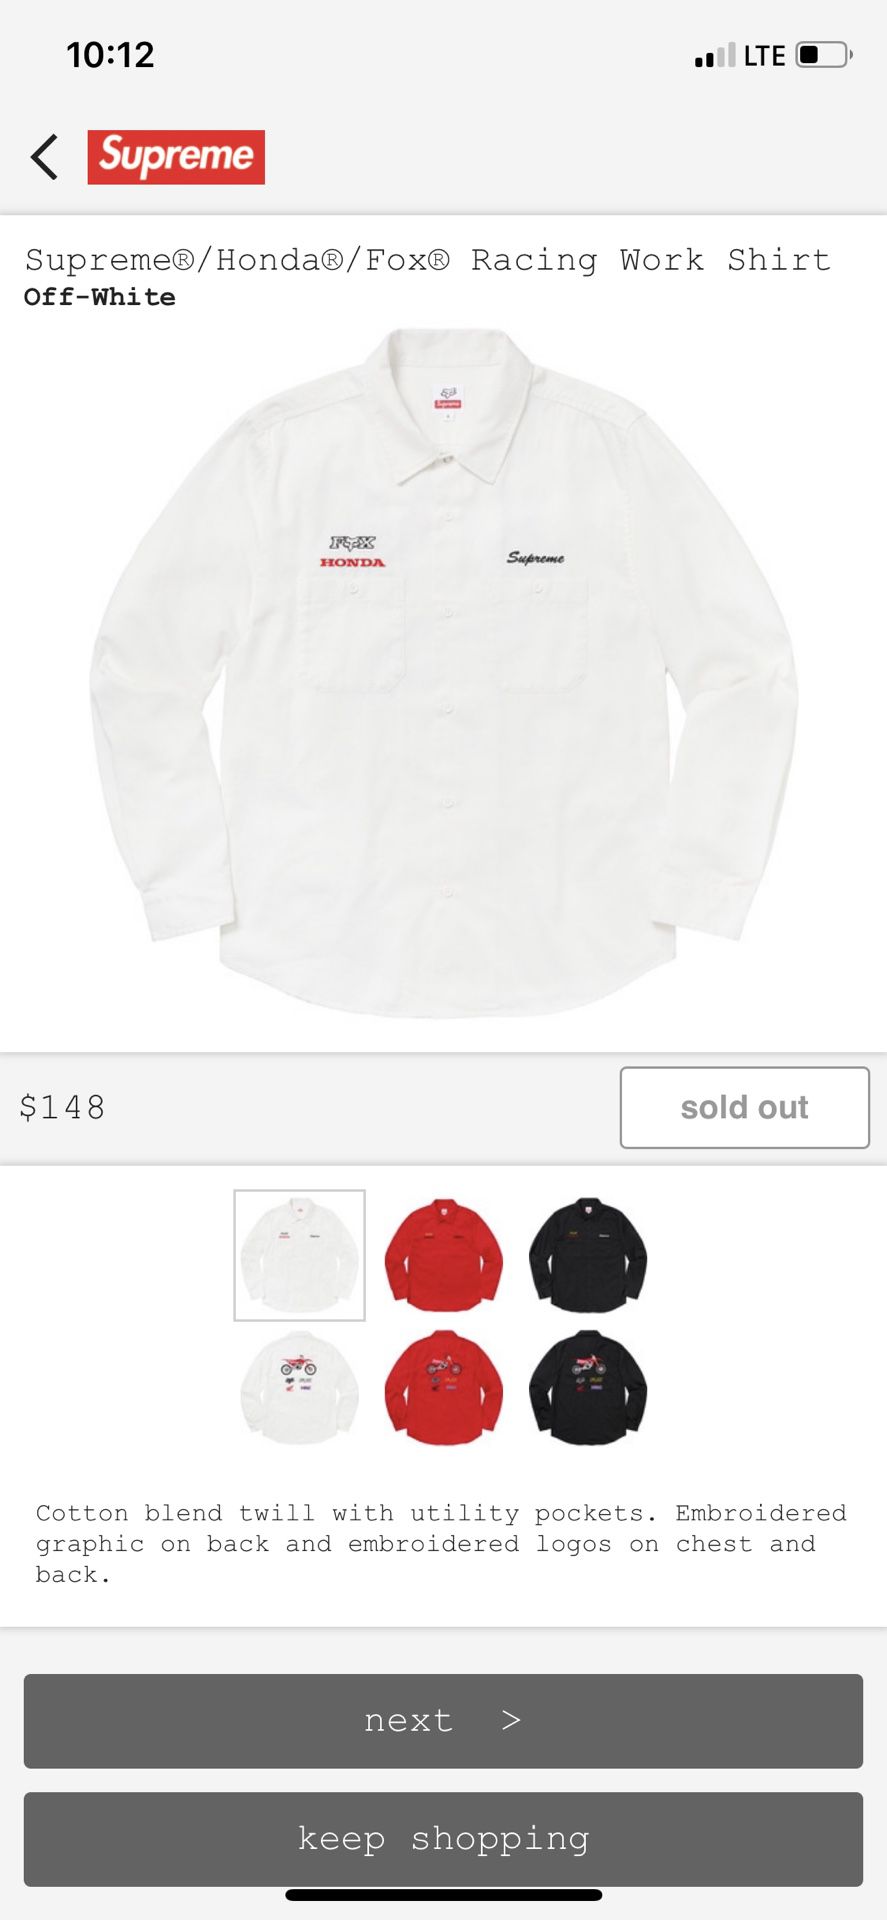 Supreme Honda Fox Racing work shirt. White. (In Hand) for Sale in